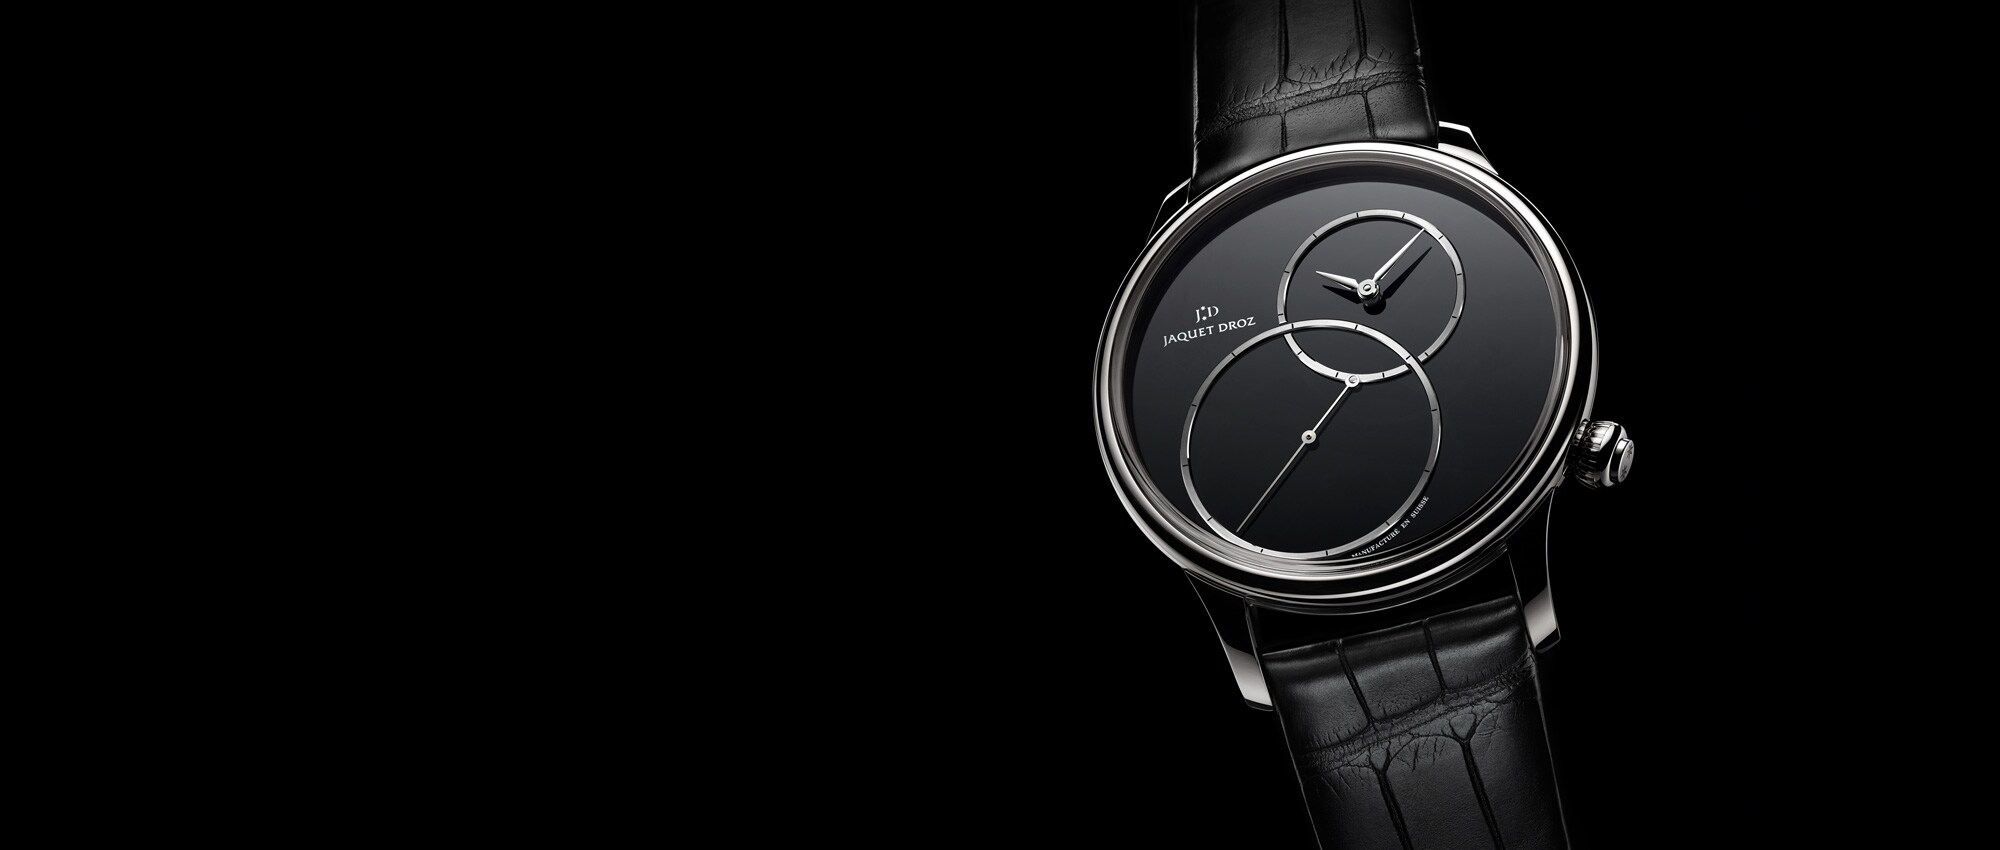 Baselworld 2016 Preview: Grande Seconde Off-Centered Onyx, the essence of blackPreview Baselworld 2016: Grande Seconde Off-Centered, the essence of blackПревью Baselworld 2016: Grande Seconde Off-Centered – магия черного цвета